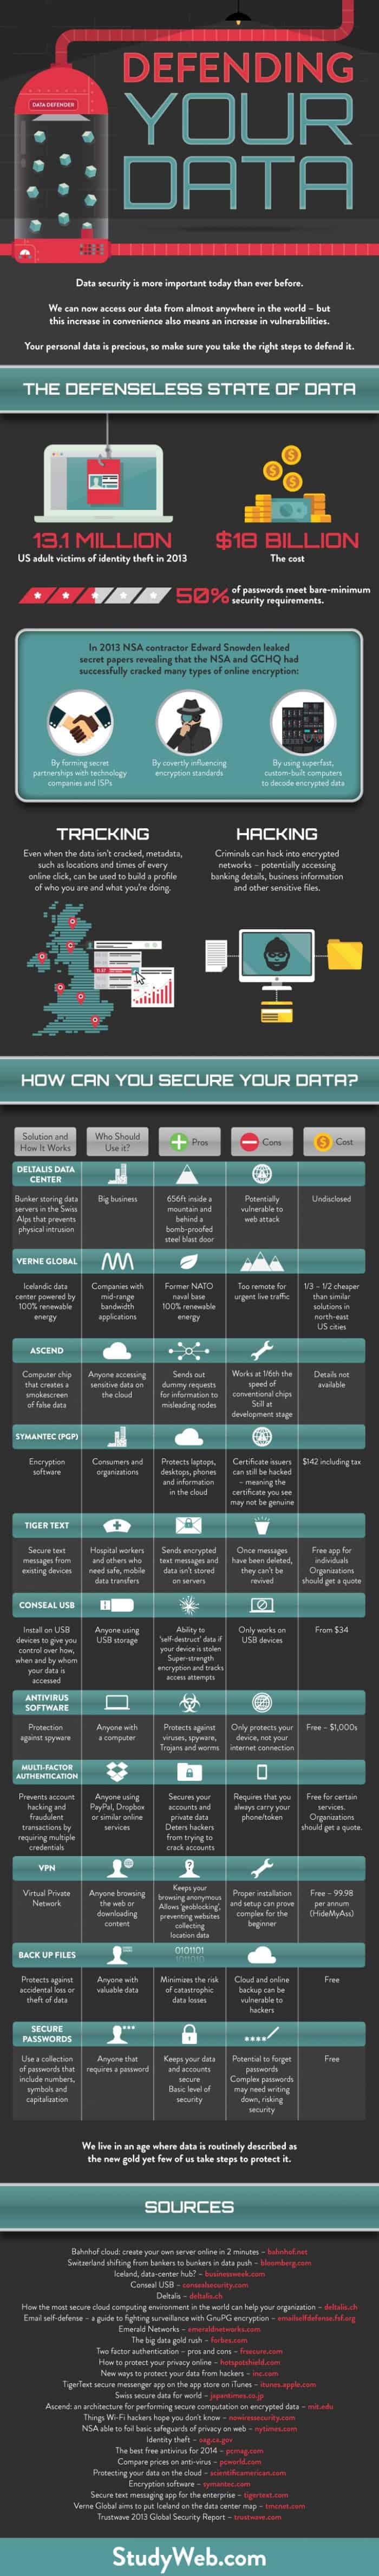 Defending your data infographic